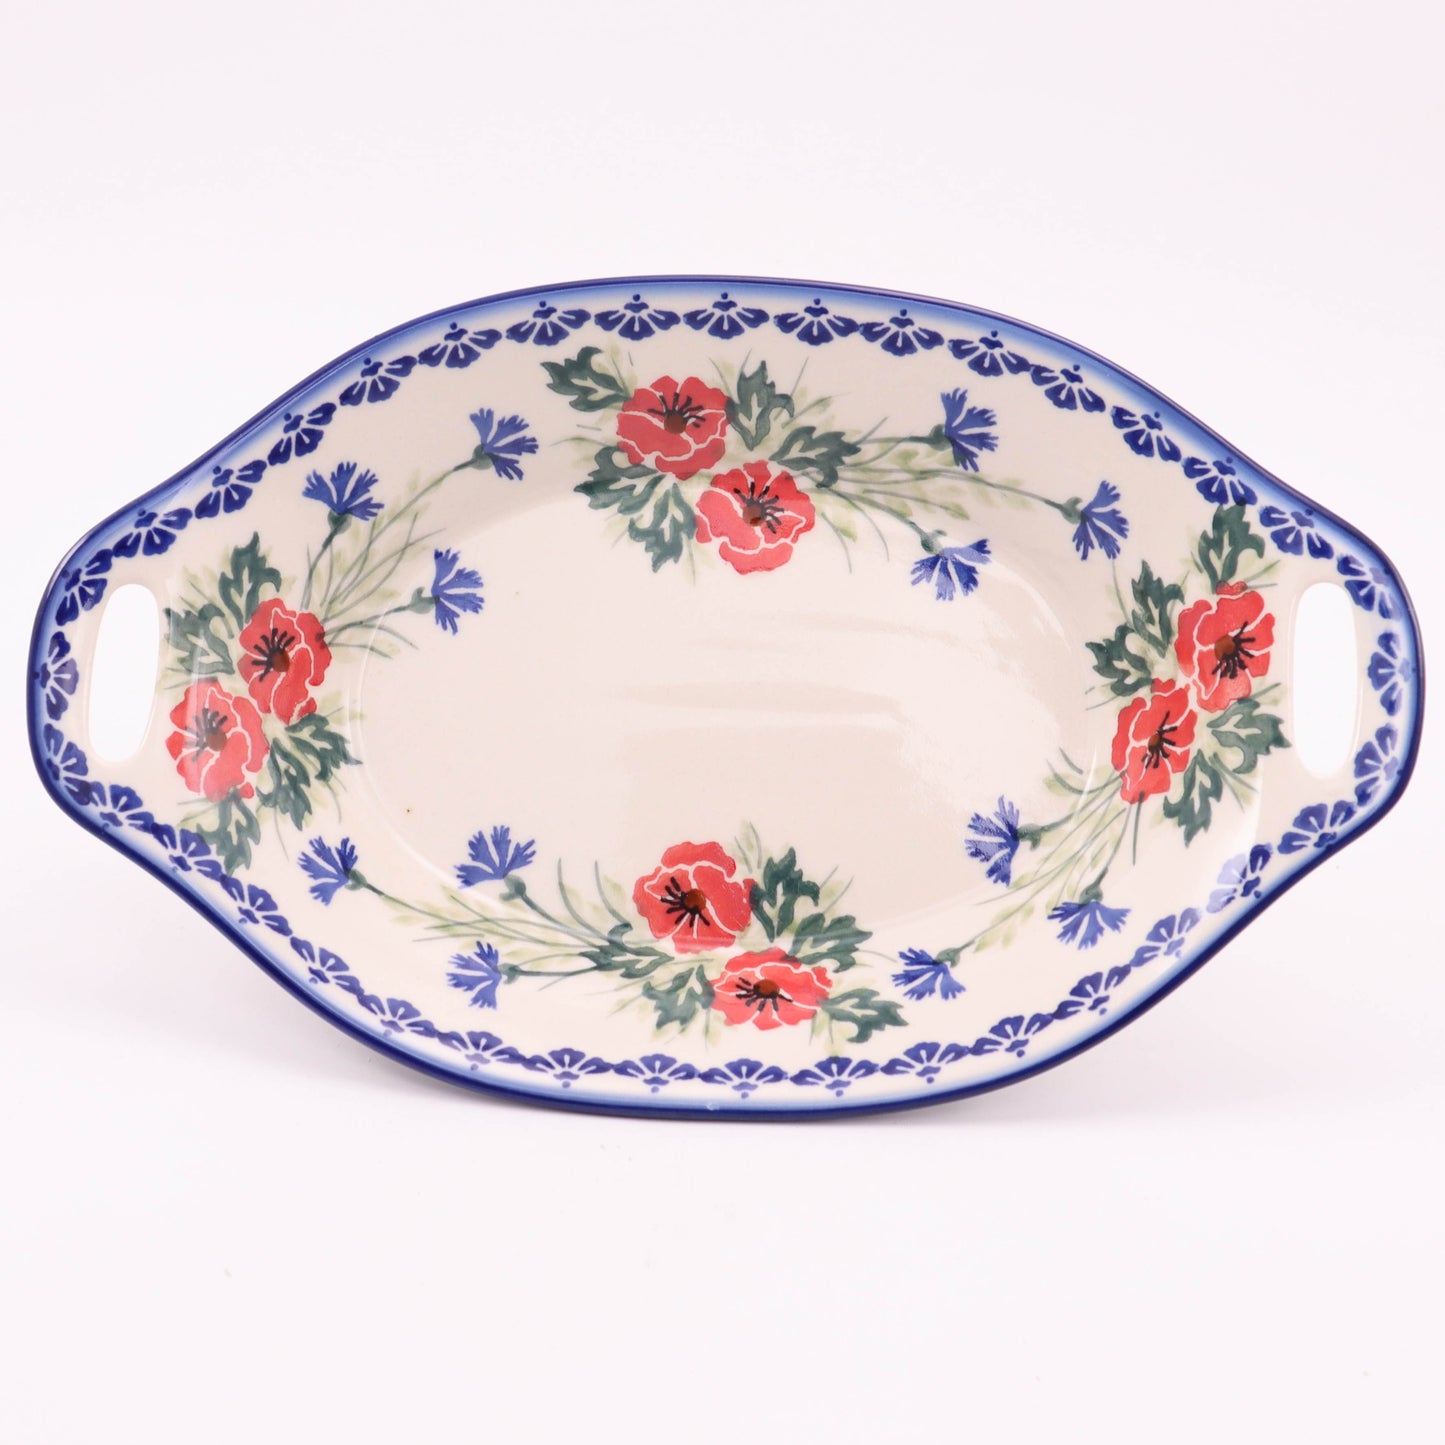 8"x13" Oval Serving Dish with Handles. Pattern: Charming Chicory